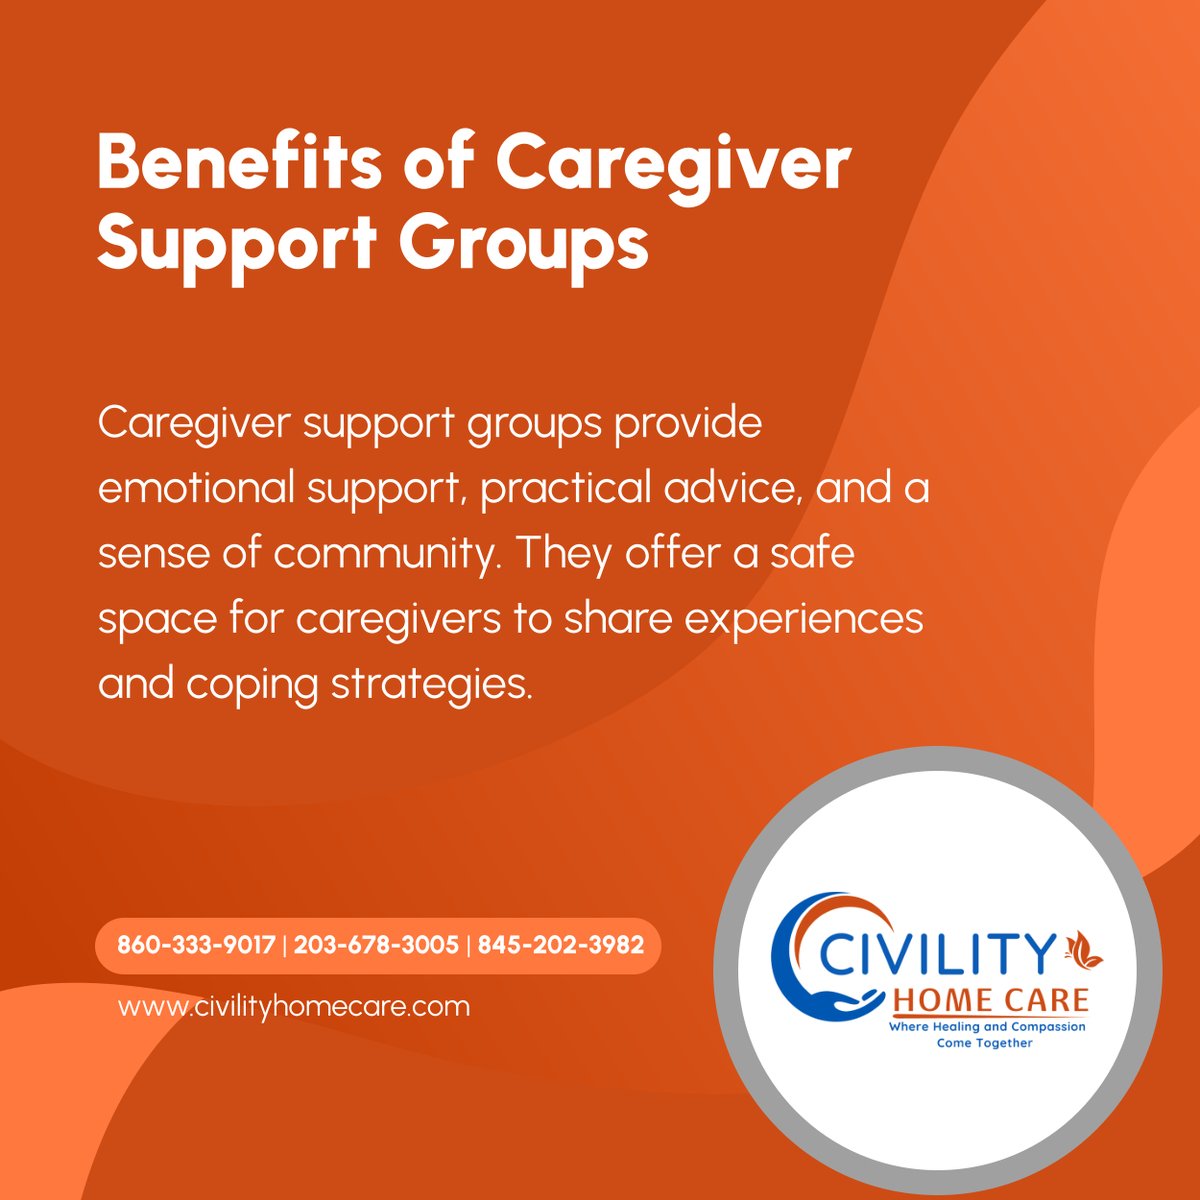 Caregiver support groups offer invaluable support and connection. 

Joining one can make the caregiving journey feel less daunting and more manageable. 

#Caregivers #SupportGroups #NewingtonCT #HomeCareAndMedicalSupplies #CaregiverCommunity